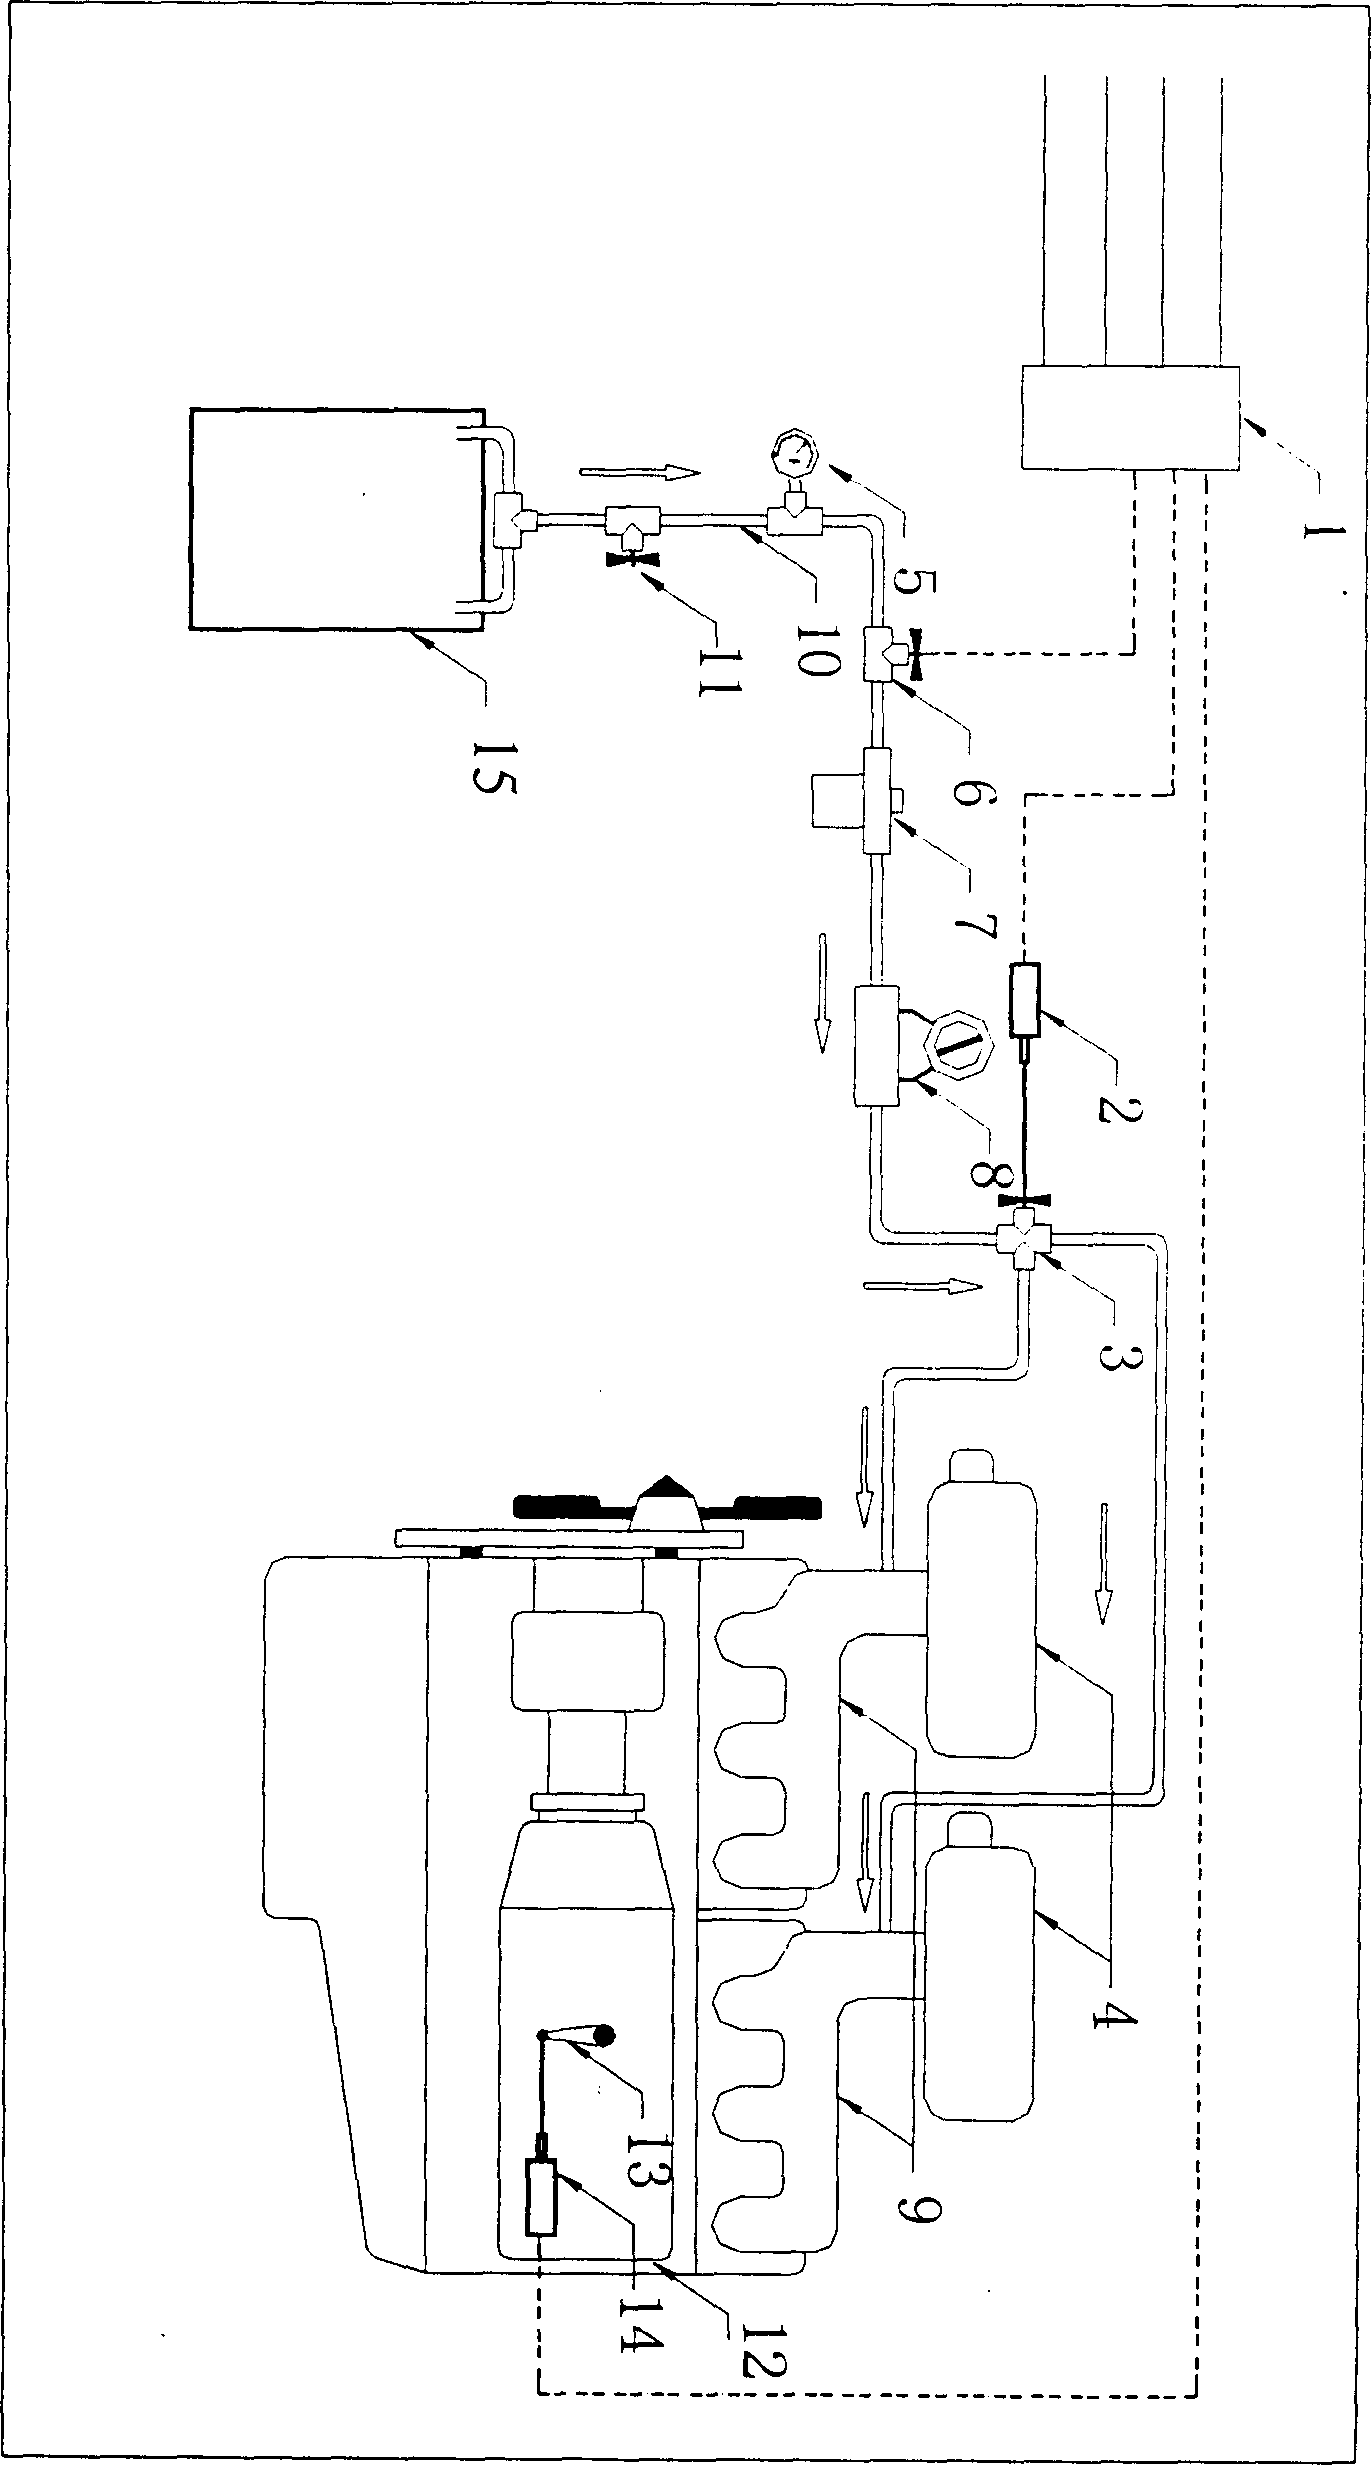 Electrically controlled dual-fuel automobile engine system refitted from mechanical diesel engine